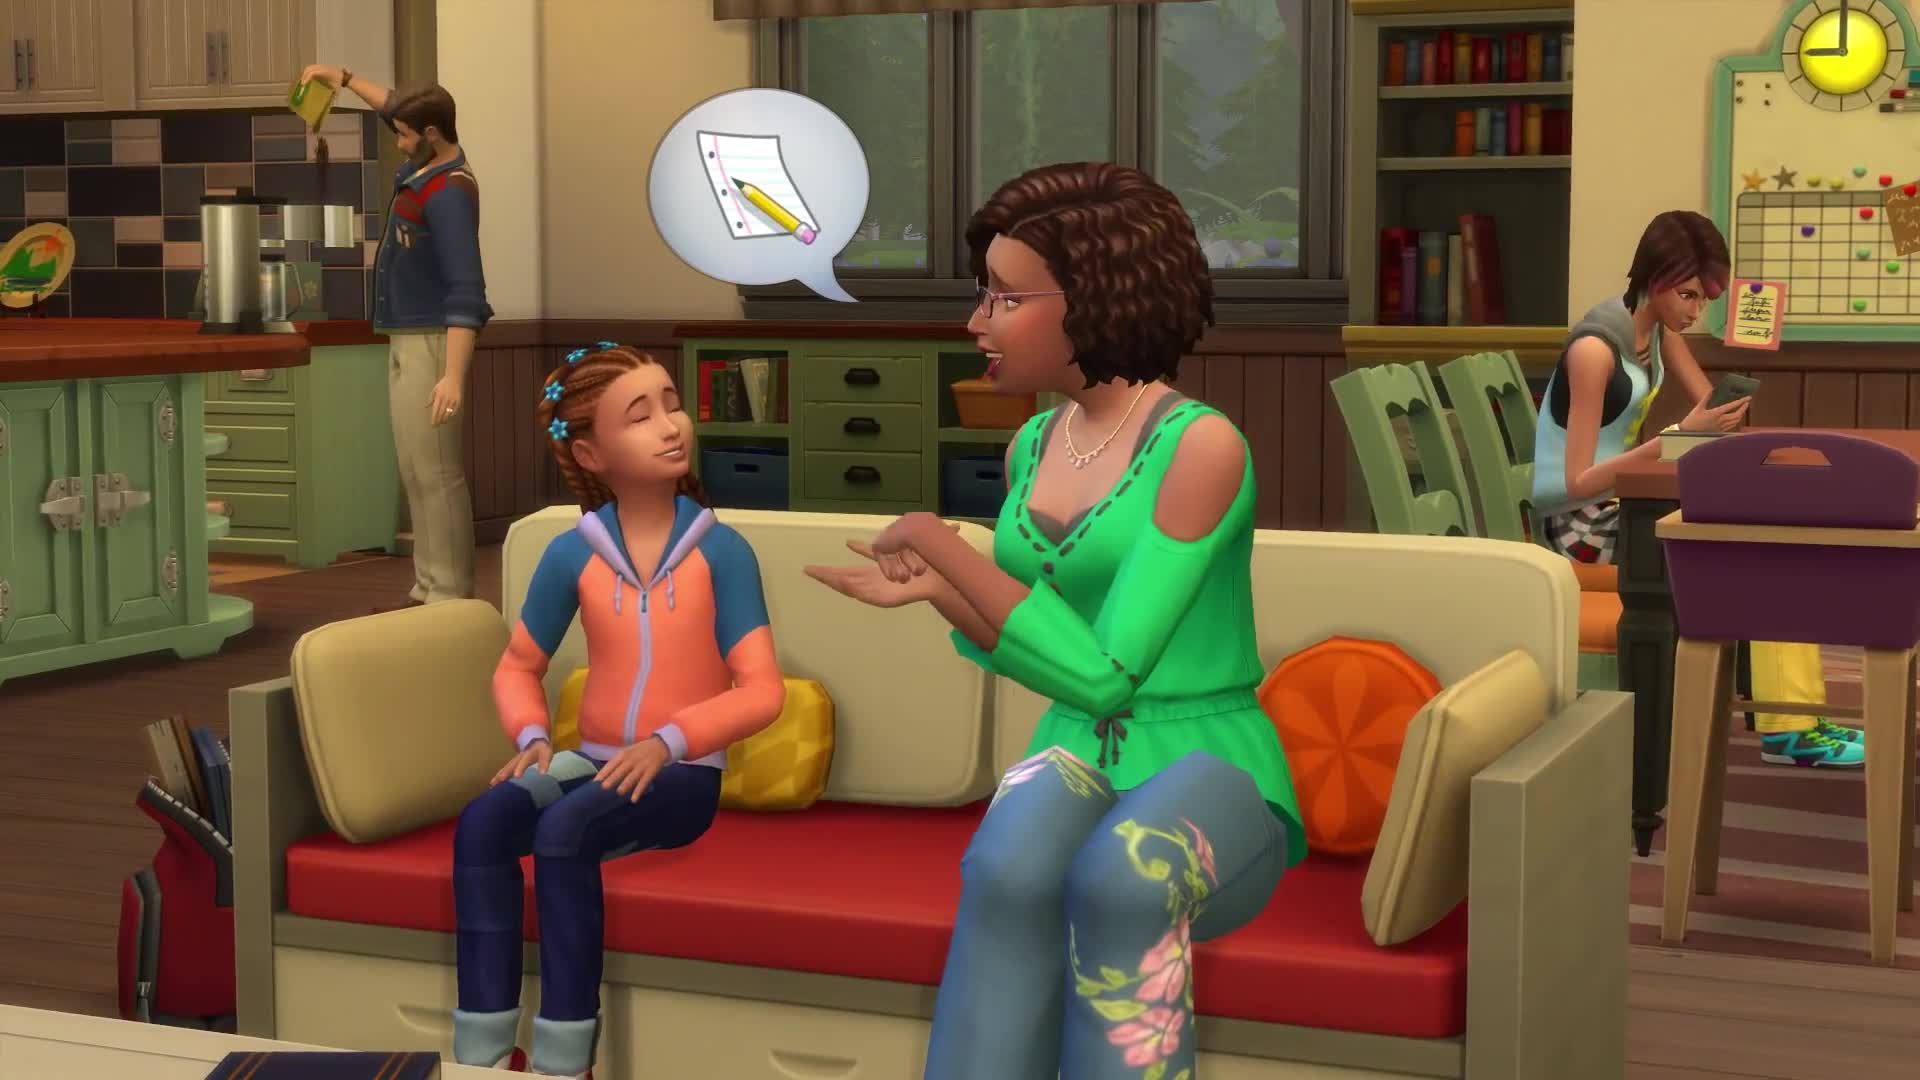 Sims 4 Parenthood DLC announced | Feed4gamers